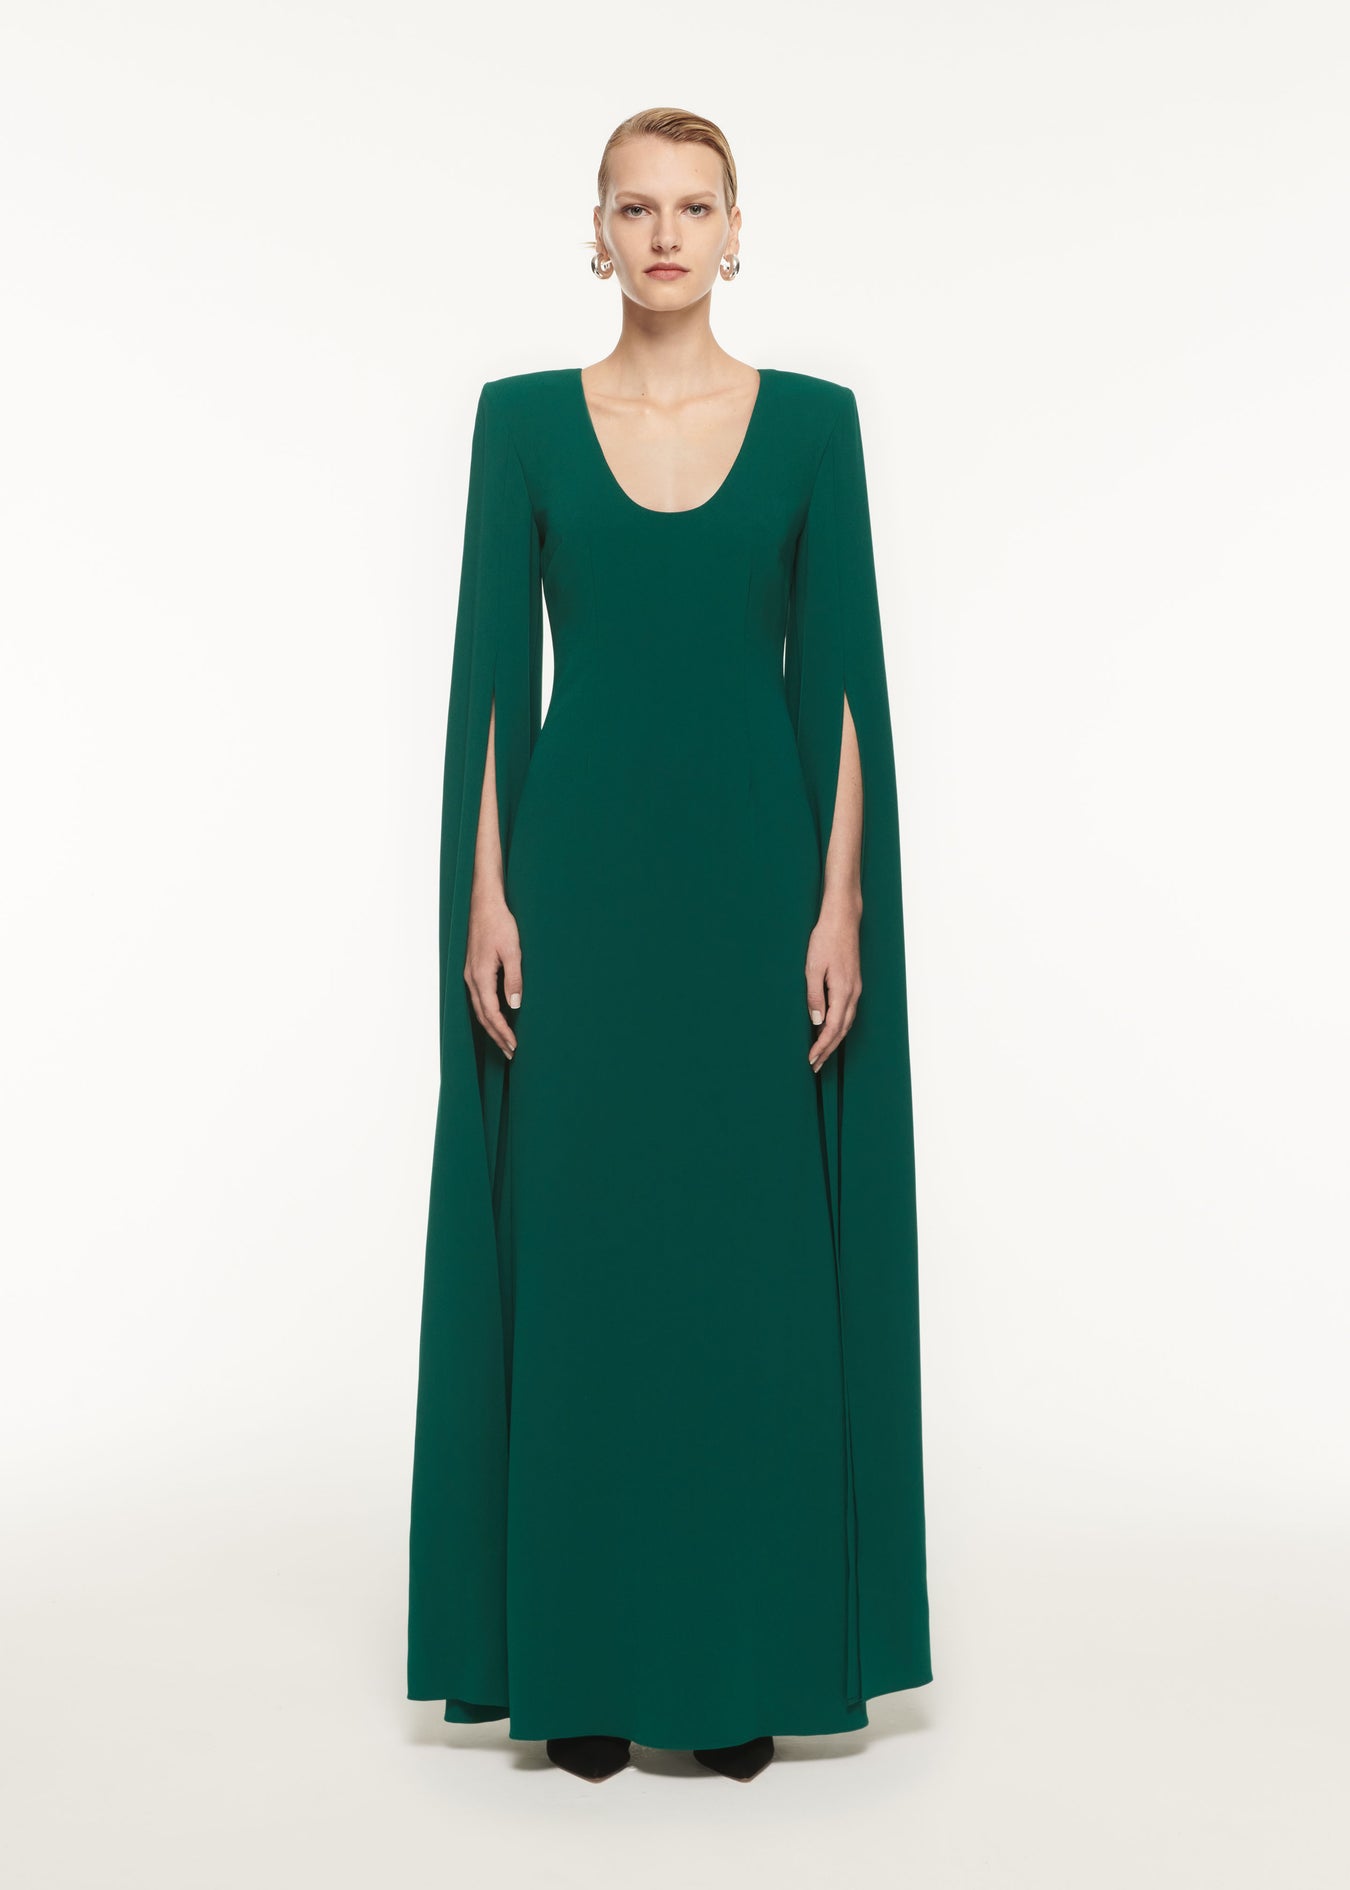 A woman wearing the Cape Sleeve Stretch Cady Maxi Dress in Green